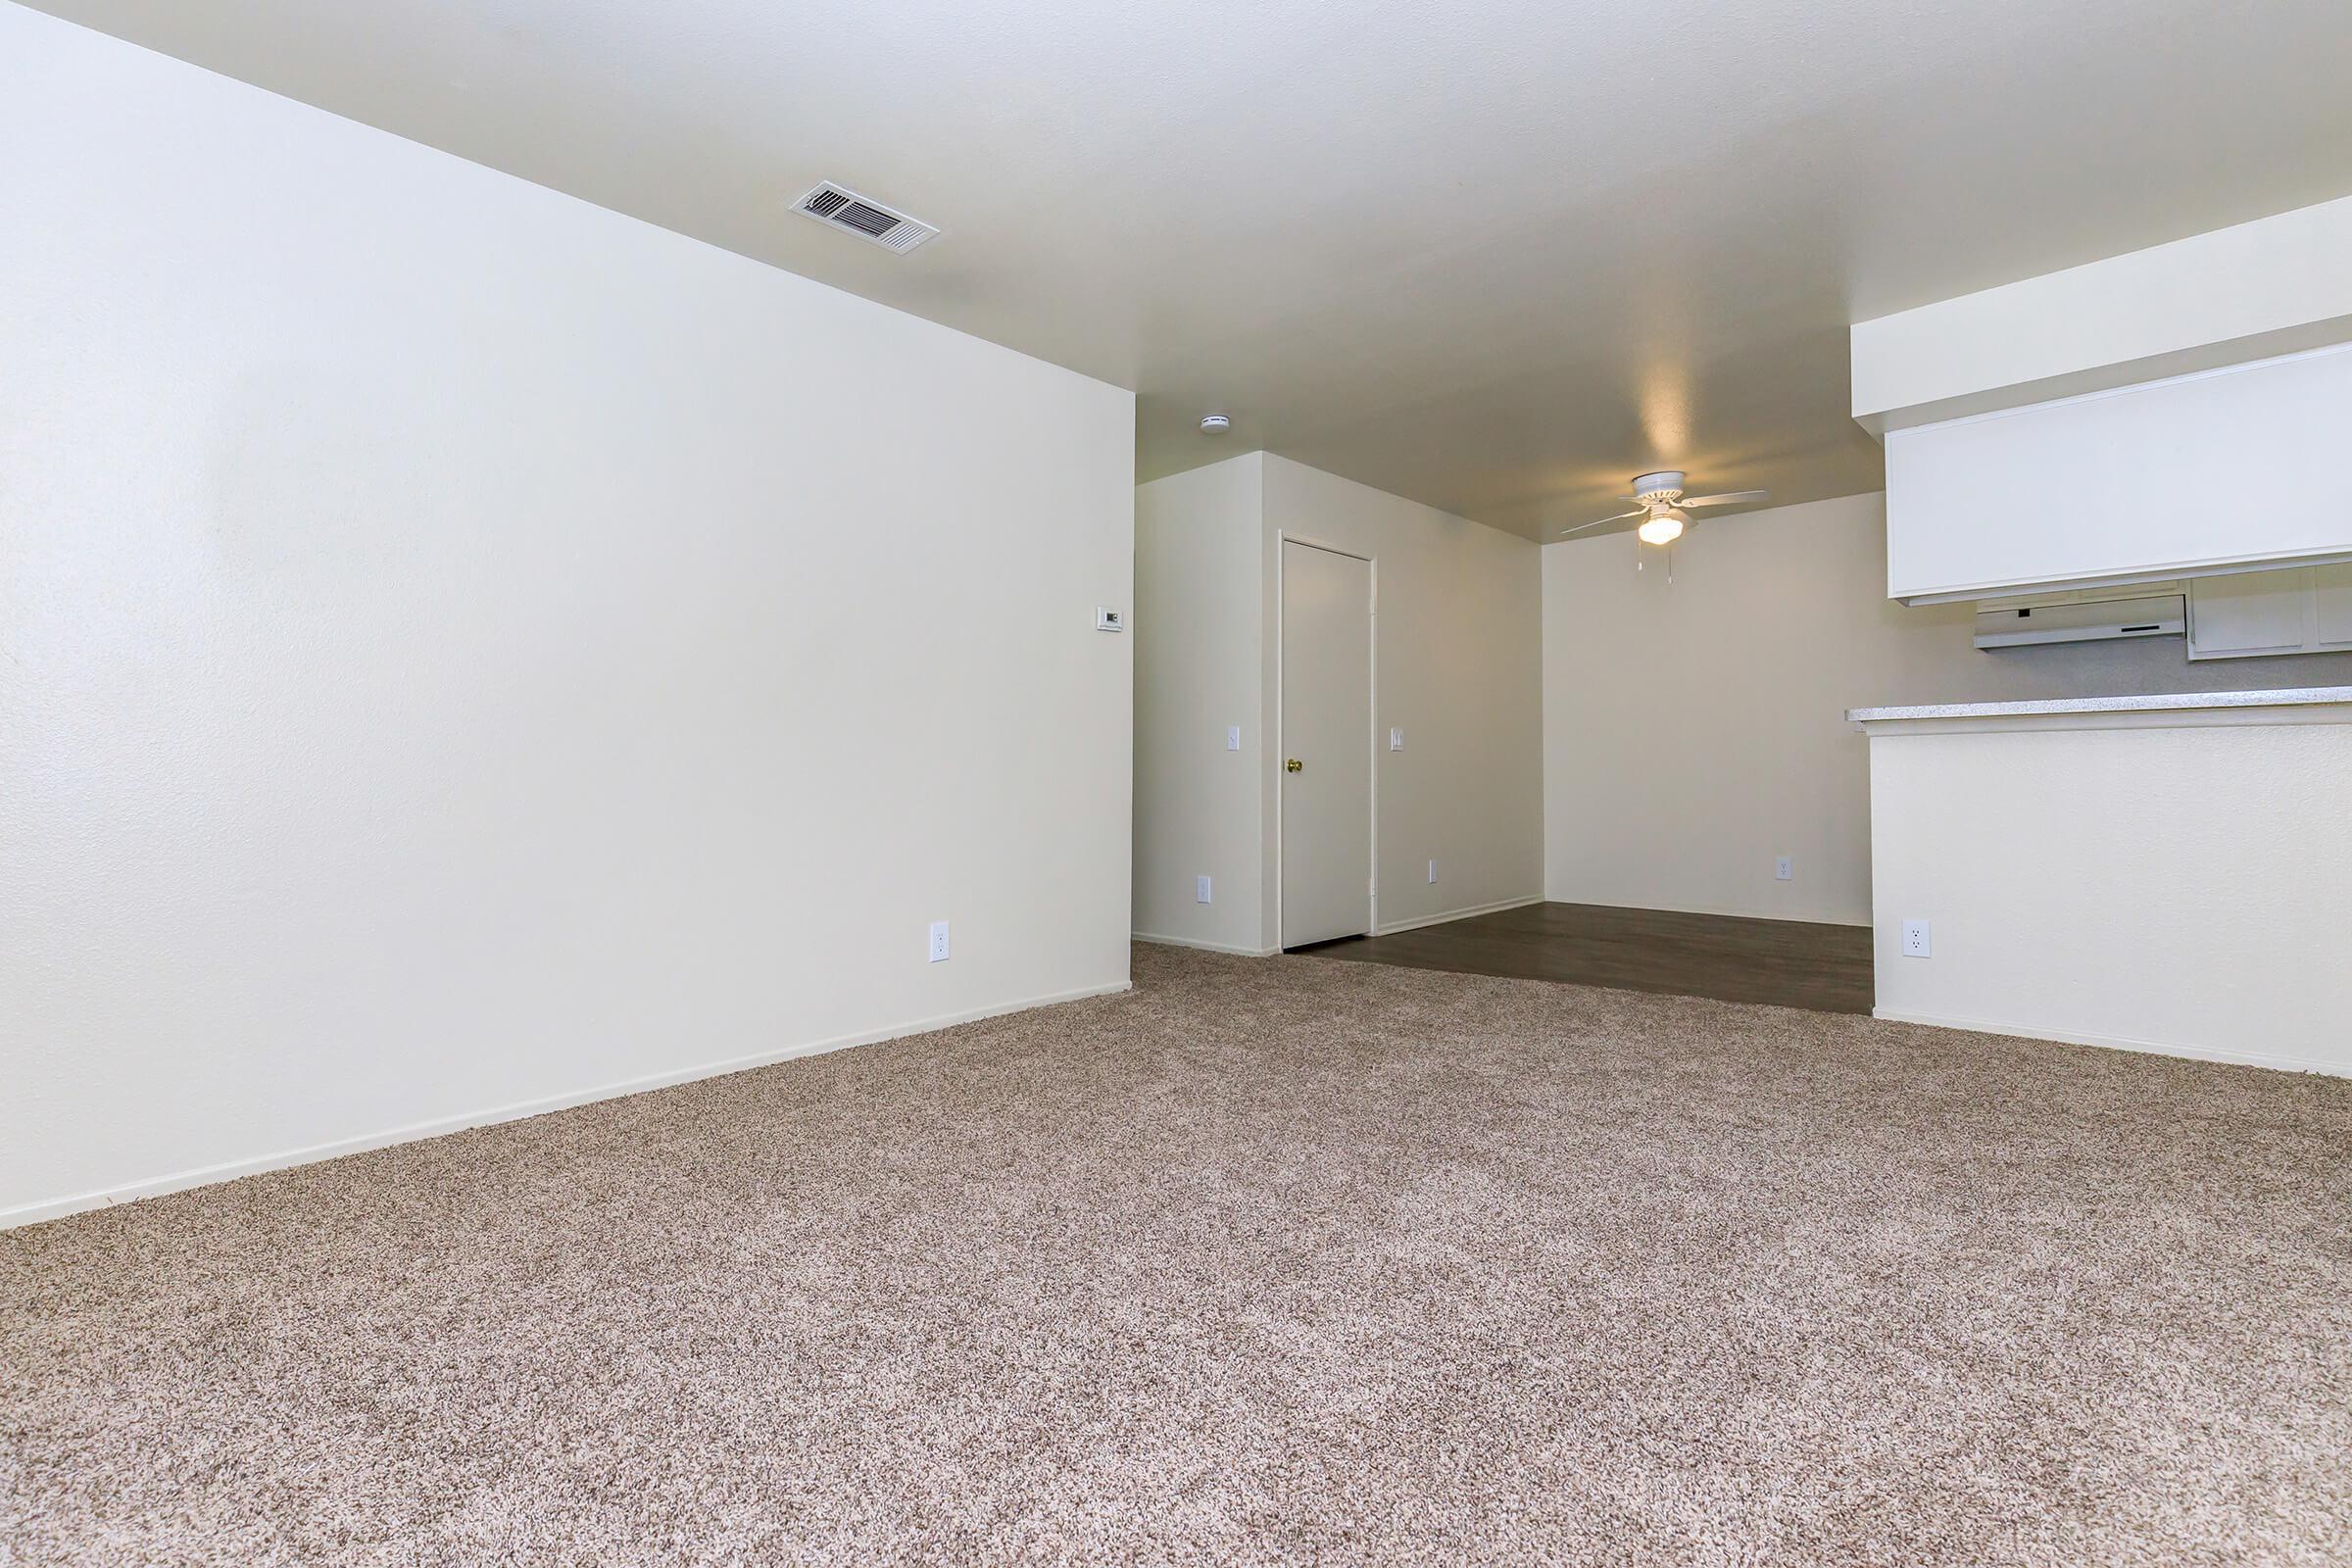 Vacant apartment with carpet and wooden floors